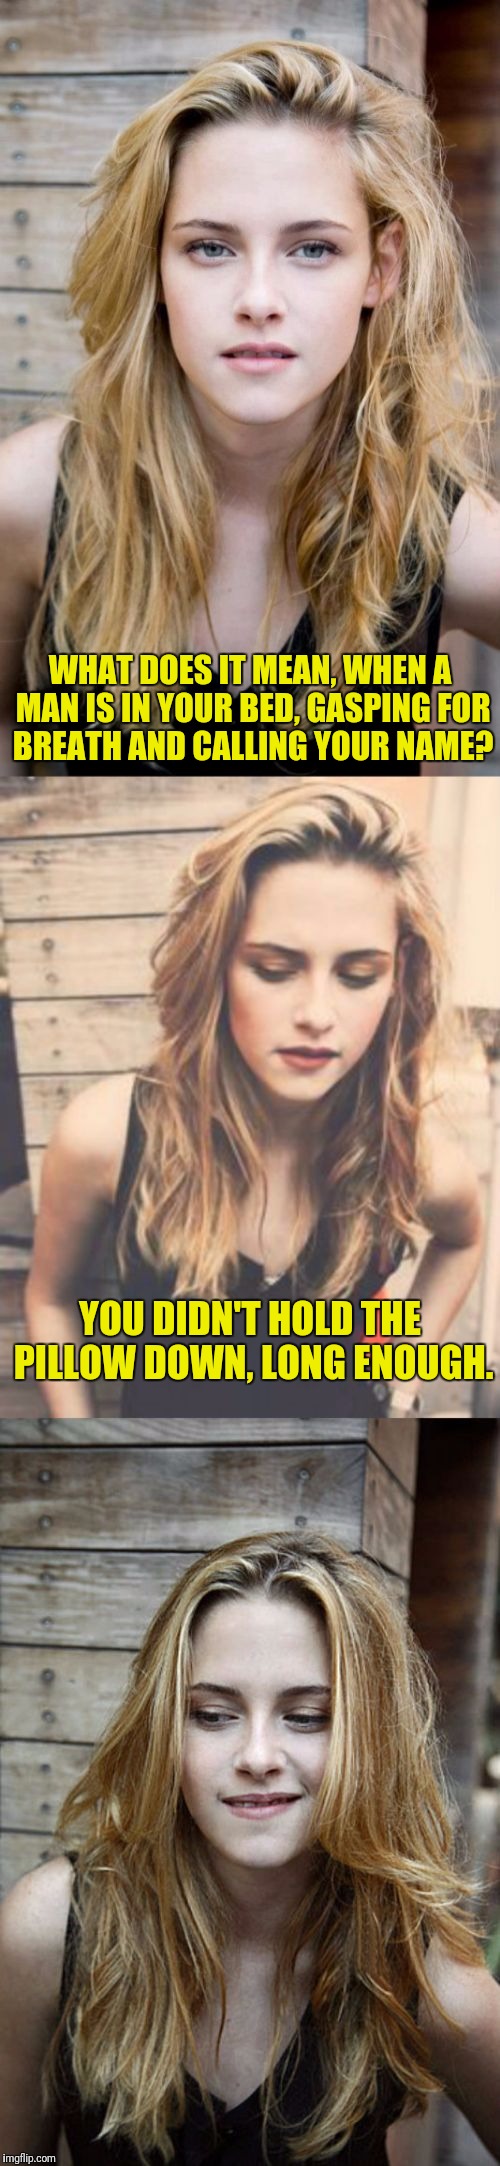 Bad Pun Kristen Stewart 2 | WHAT DOES IT MEAN, WHEN A MAN IS IN YOUR BED, GASPING FOR BREATH AND CALLING YOUR NAME? YOU DIDN'T HOLD THE PILLOW DOWN, LONG ENOUGH. | image tagged in bad pun kristen stewart 2,google images,imgflip meme | made w/ Imgflip meme maker